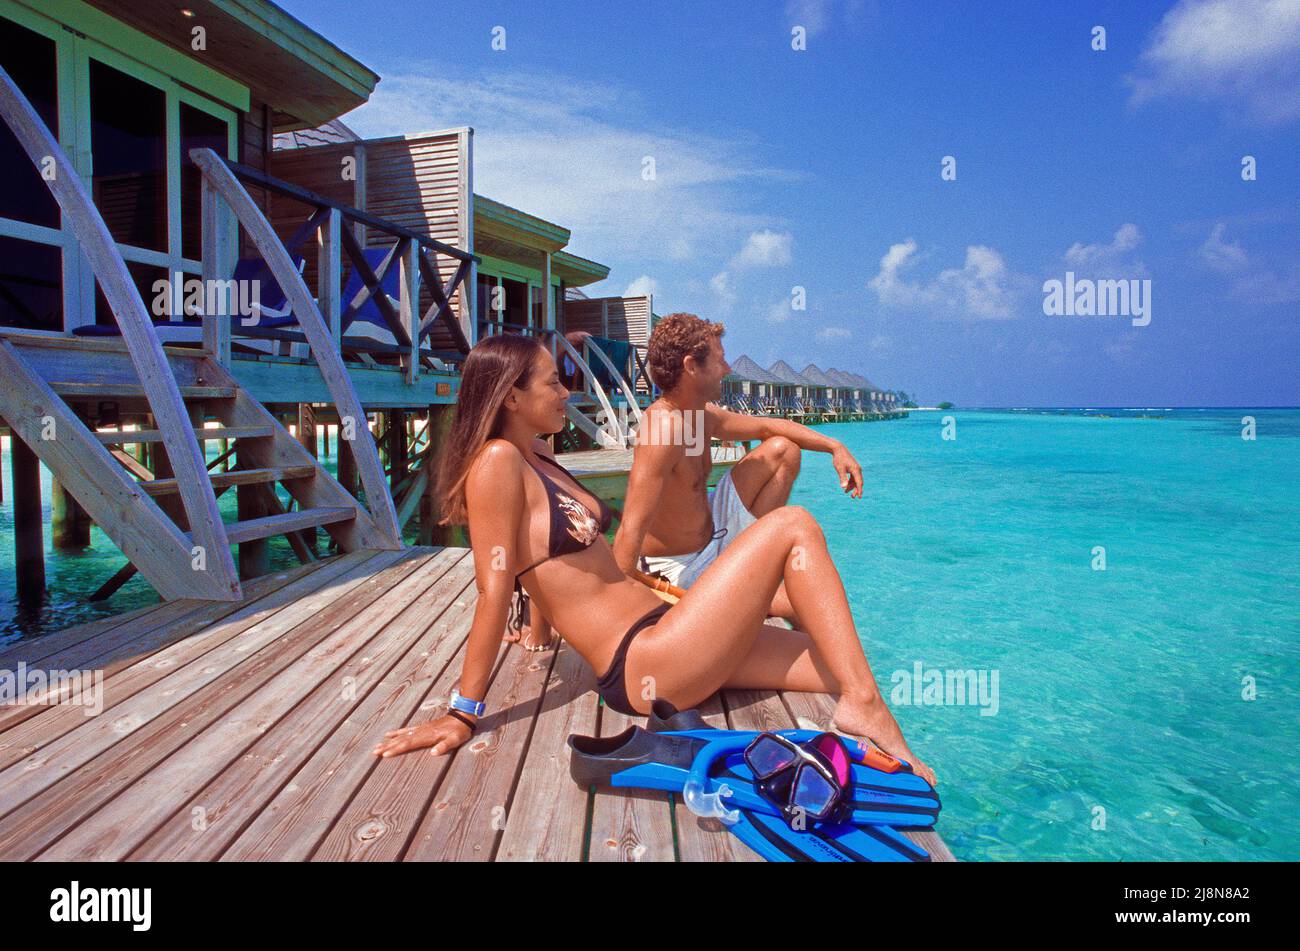 Couple sitting on a platform at the over-water bungalows, Kuredu, Laviyani Atoll, Indian Ocean, Asia Stock Photo